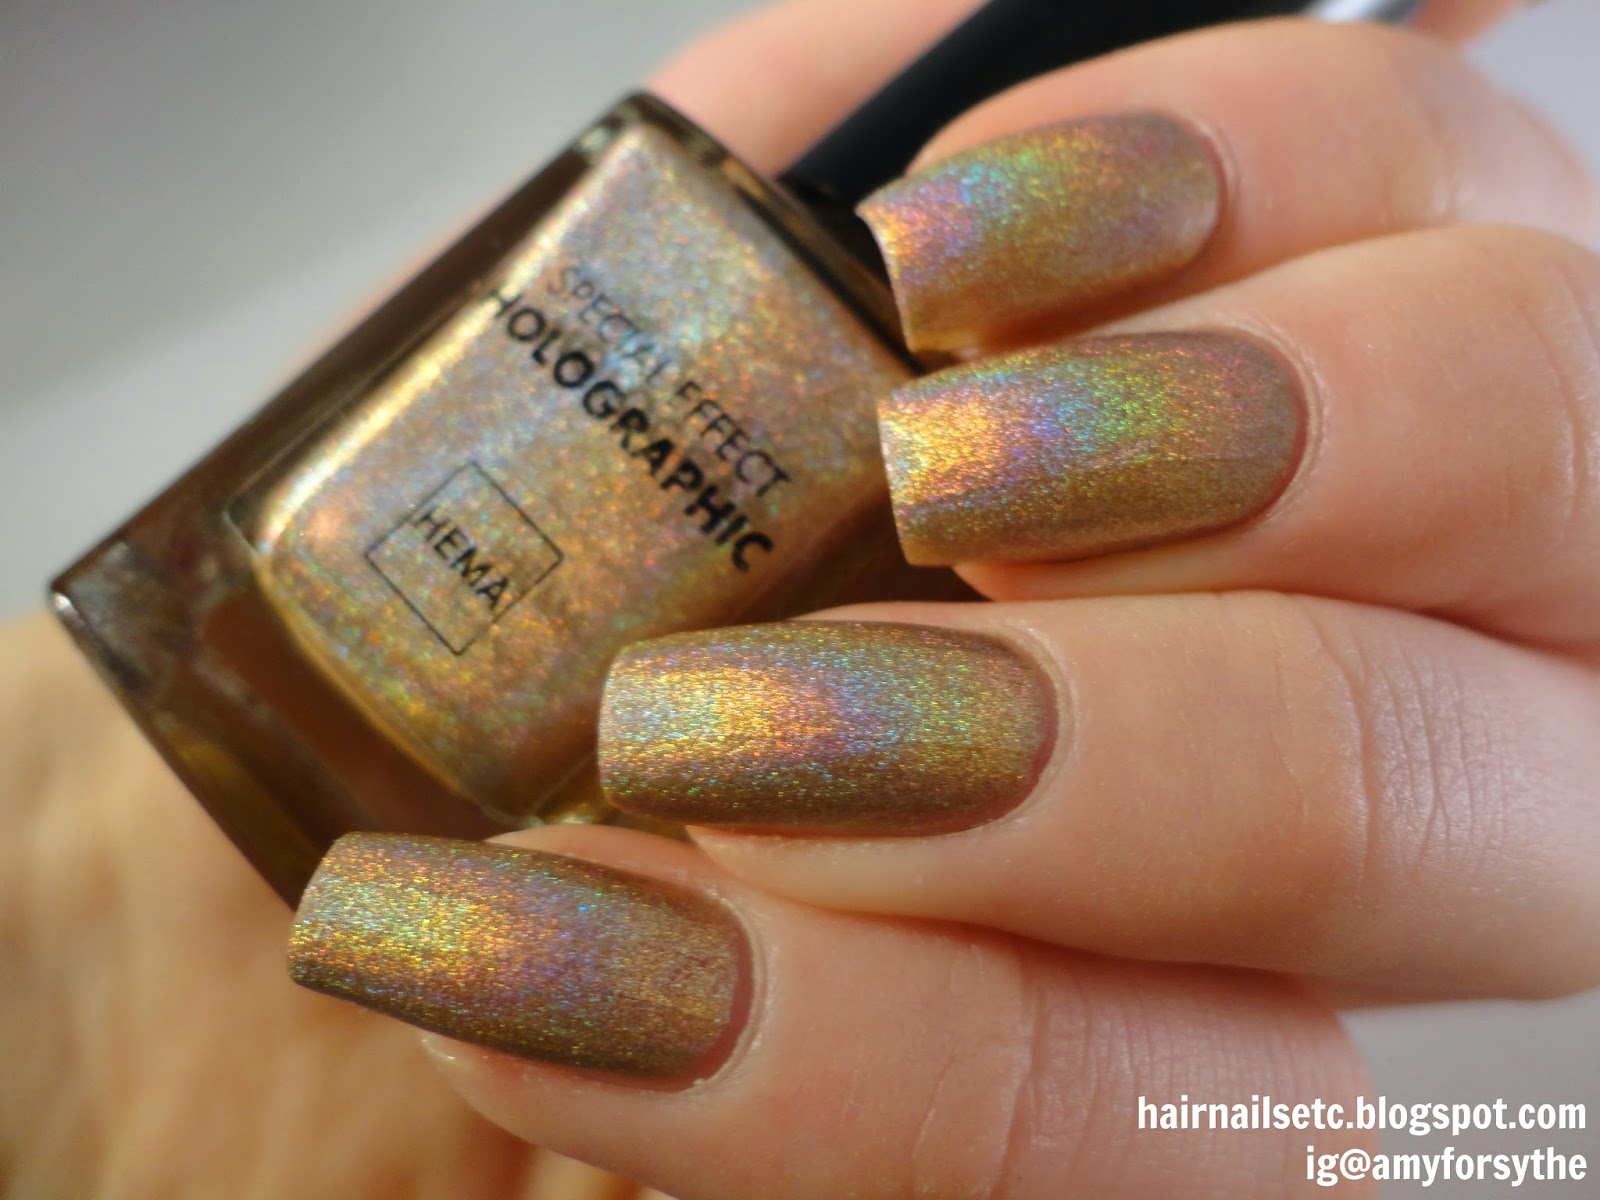 Hema, special effect, holographic nail polish, 52, holographic copper, gold, swatch, review